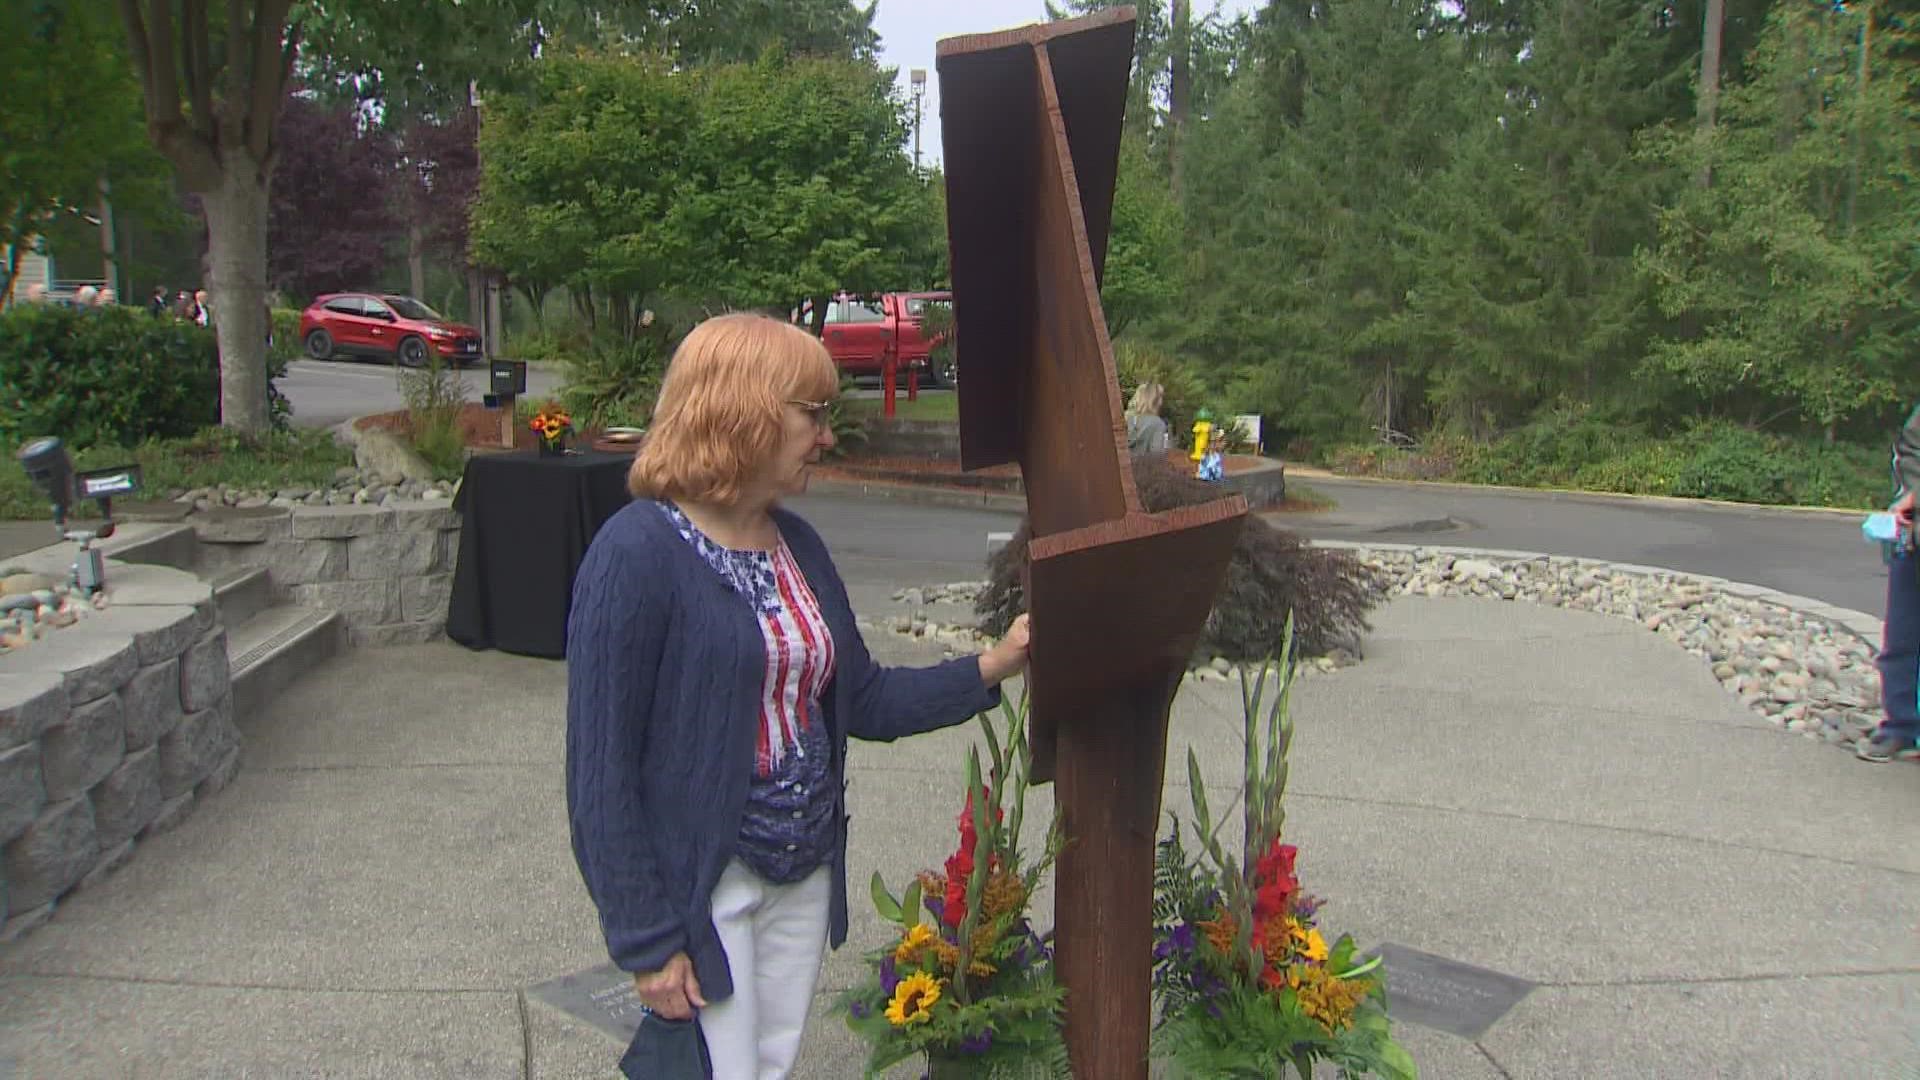 The Gig Harbor Fire Department honored the lives lost in the 9/11 attack with a public ceremony.